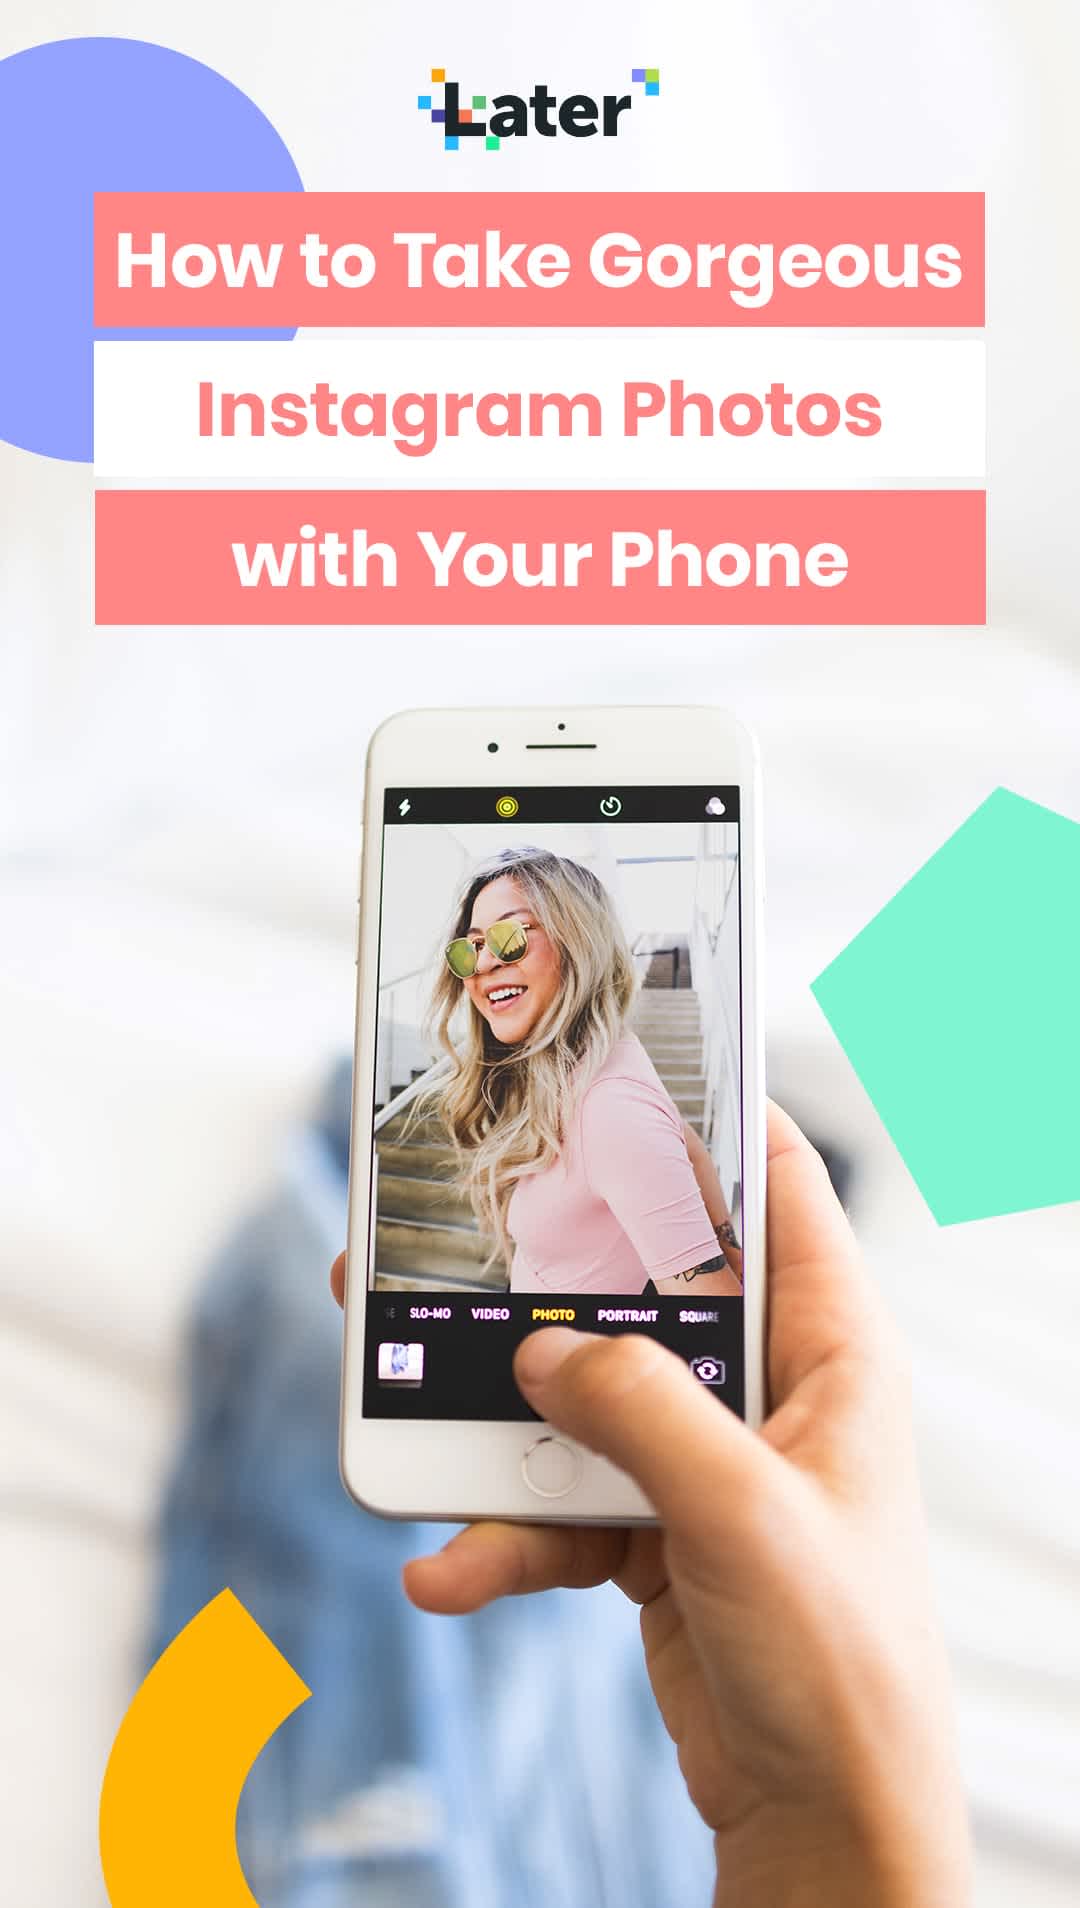 How to Take Gorgeous Instagram Photos with Your Phone